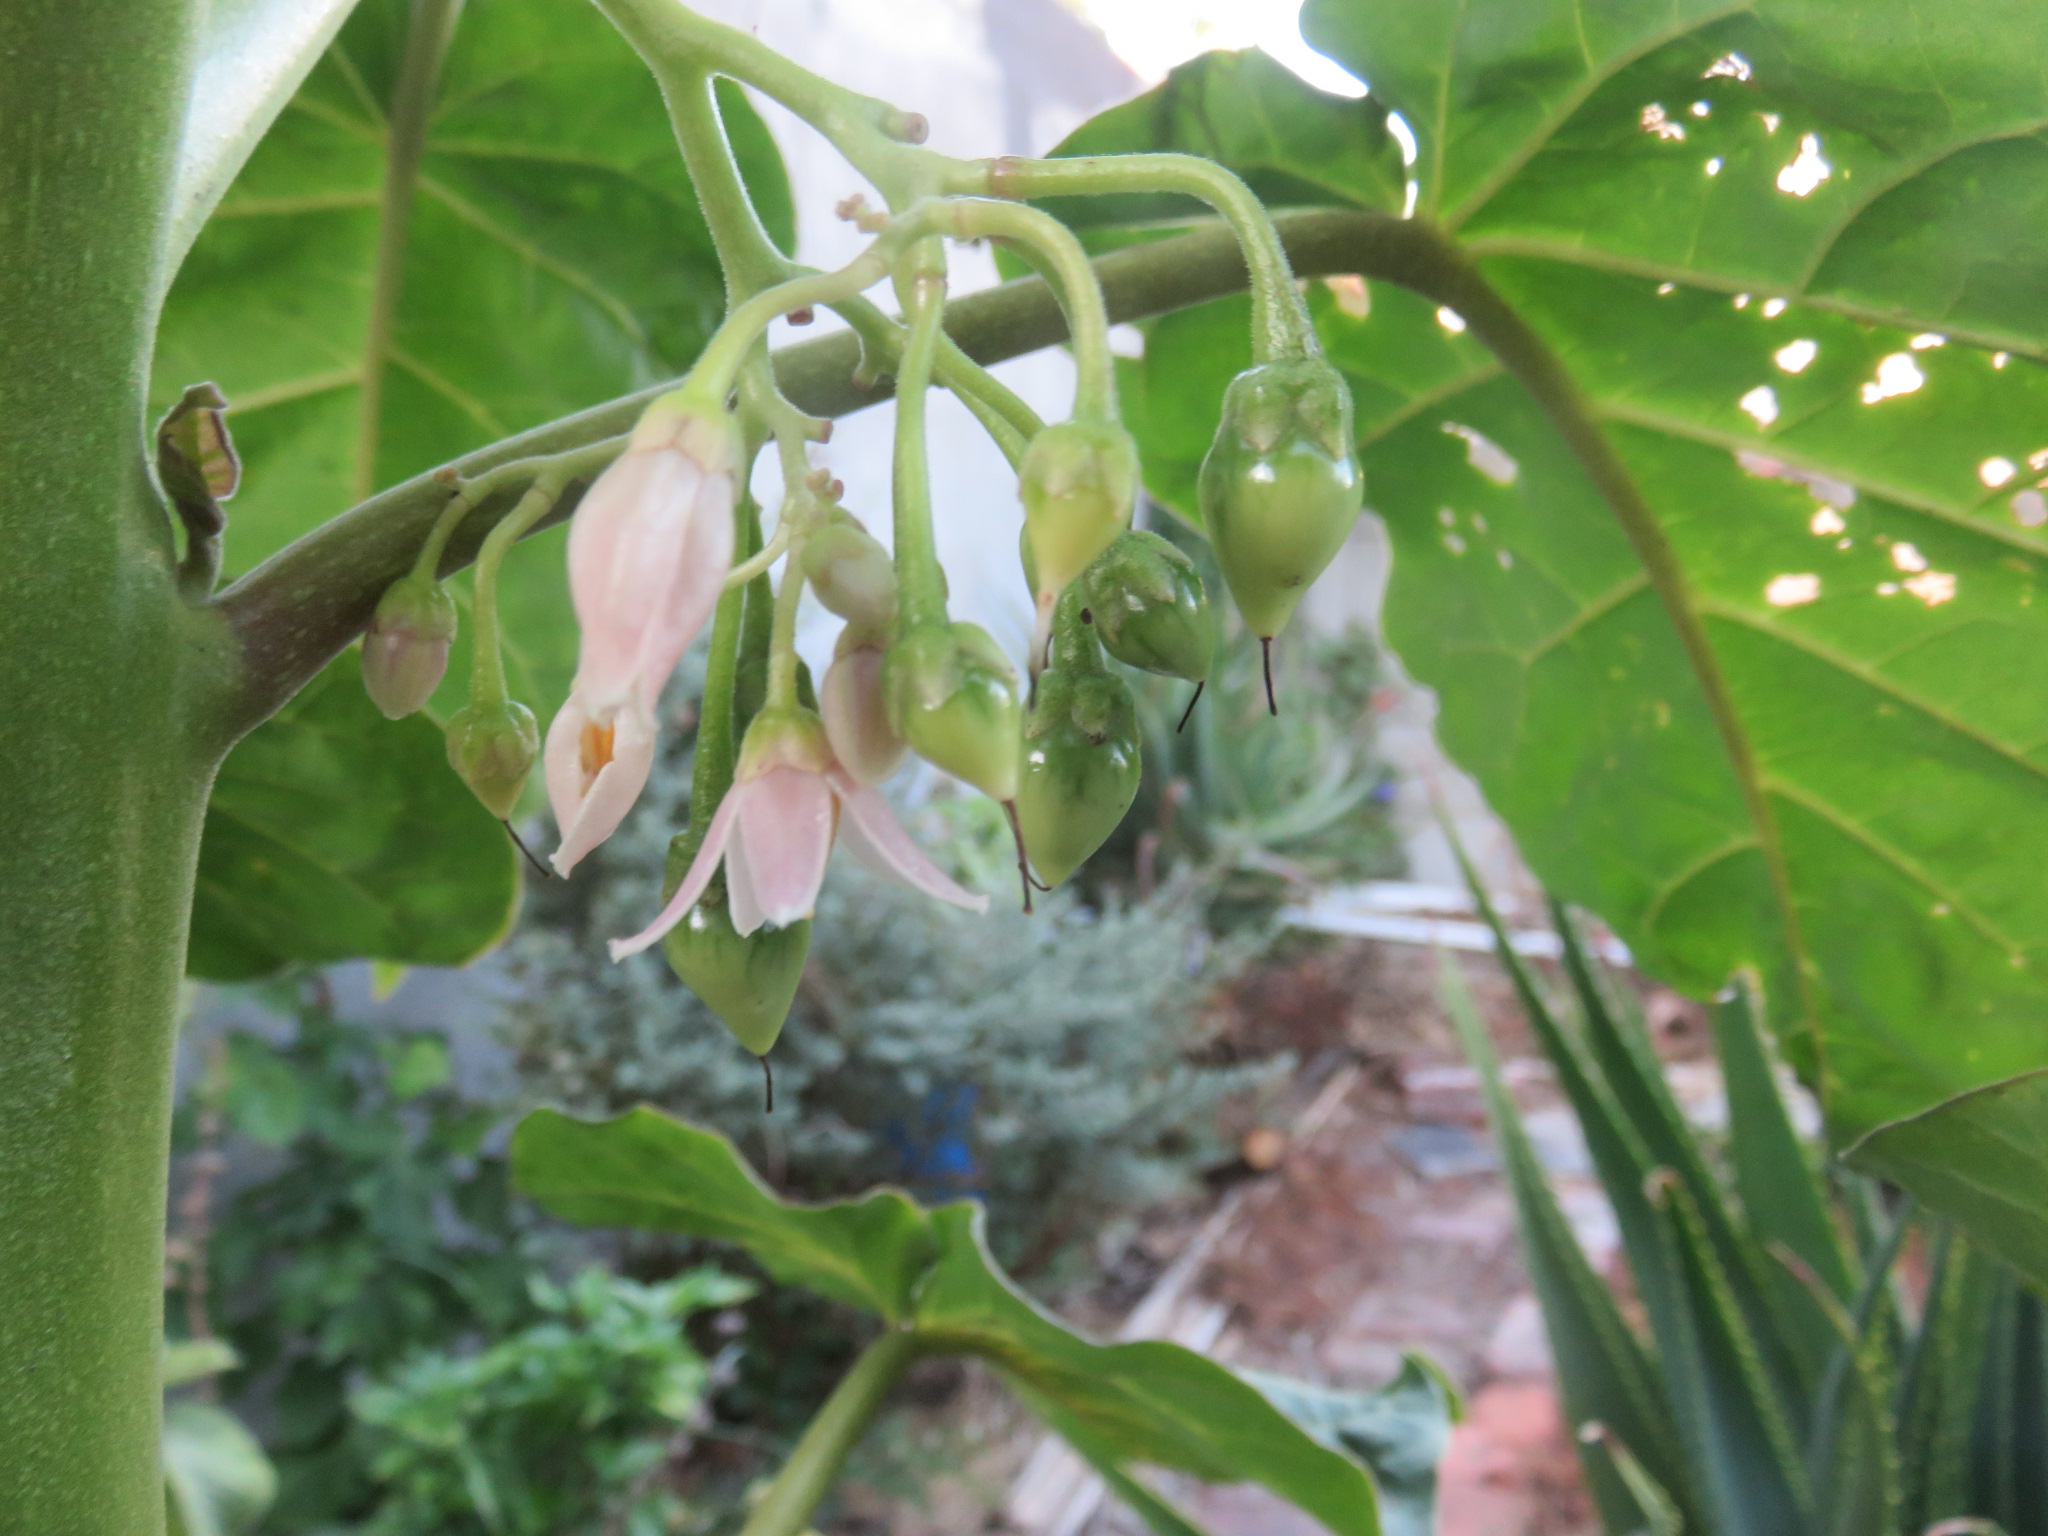 Tiny fruits appear soon after flowering, but will take 6 month to ripen on the tree